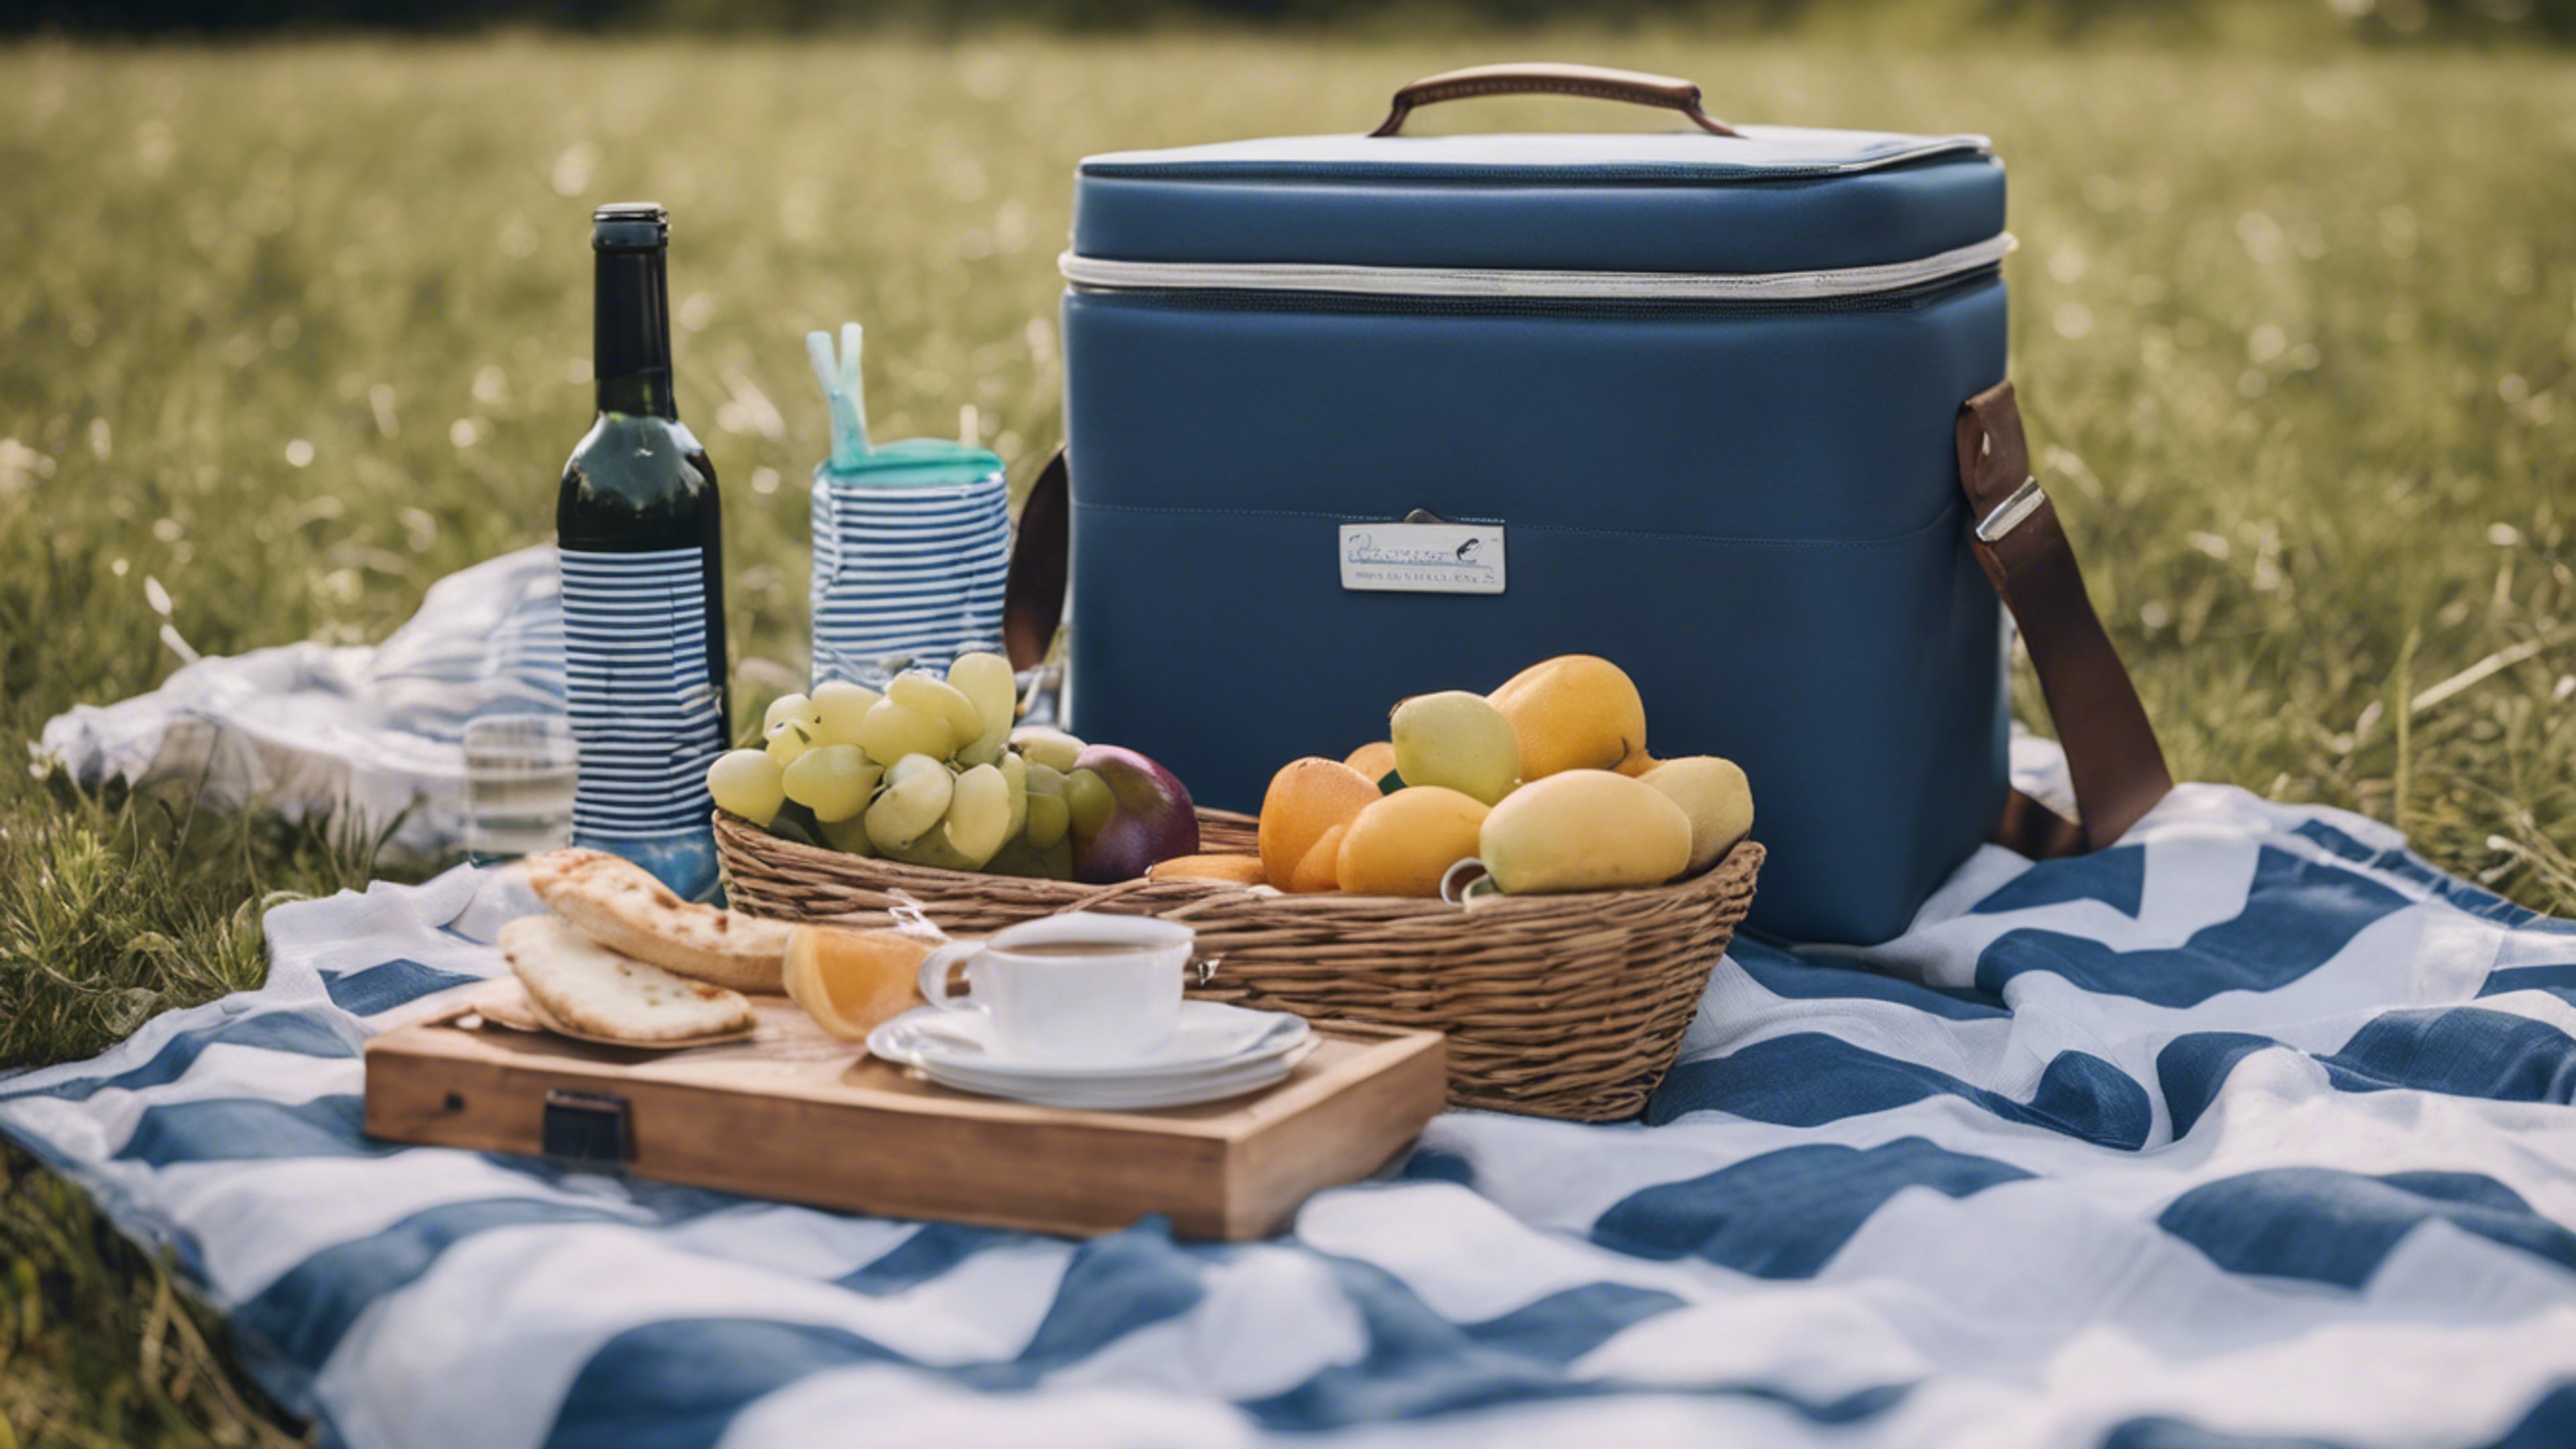 A preppy picnic setup in a grassy meadow, featuring a blue and white striped picnic blanket and matching cooler. Wallpaper[2c3aa7a20c924d6f9450]